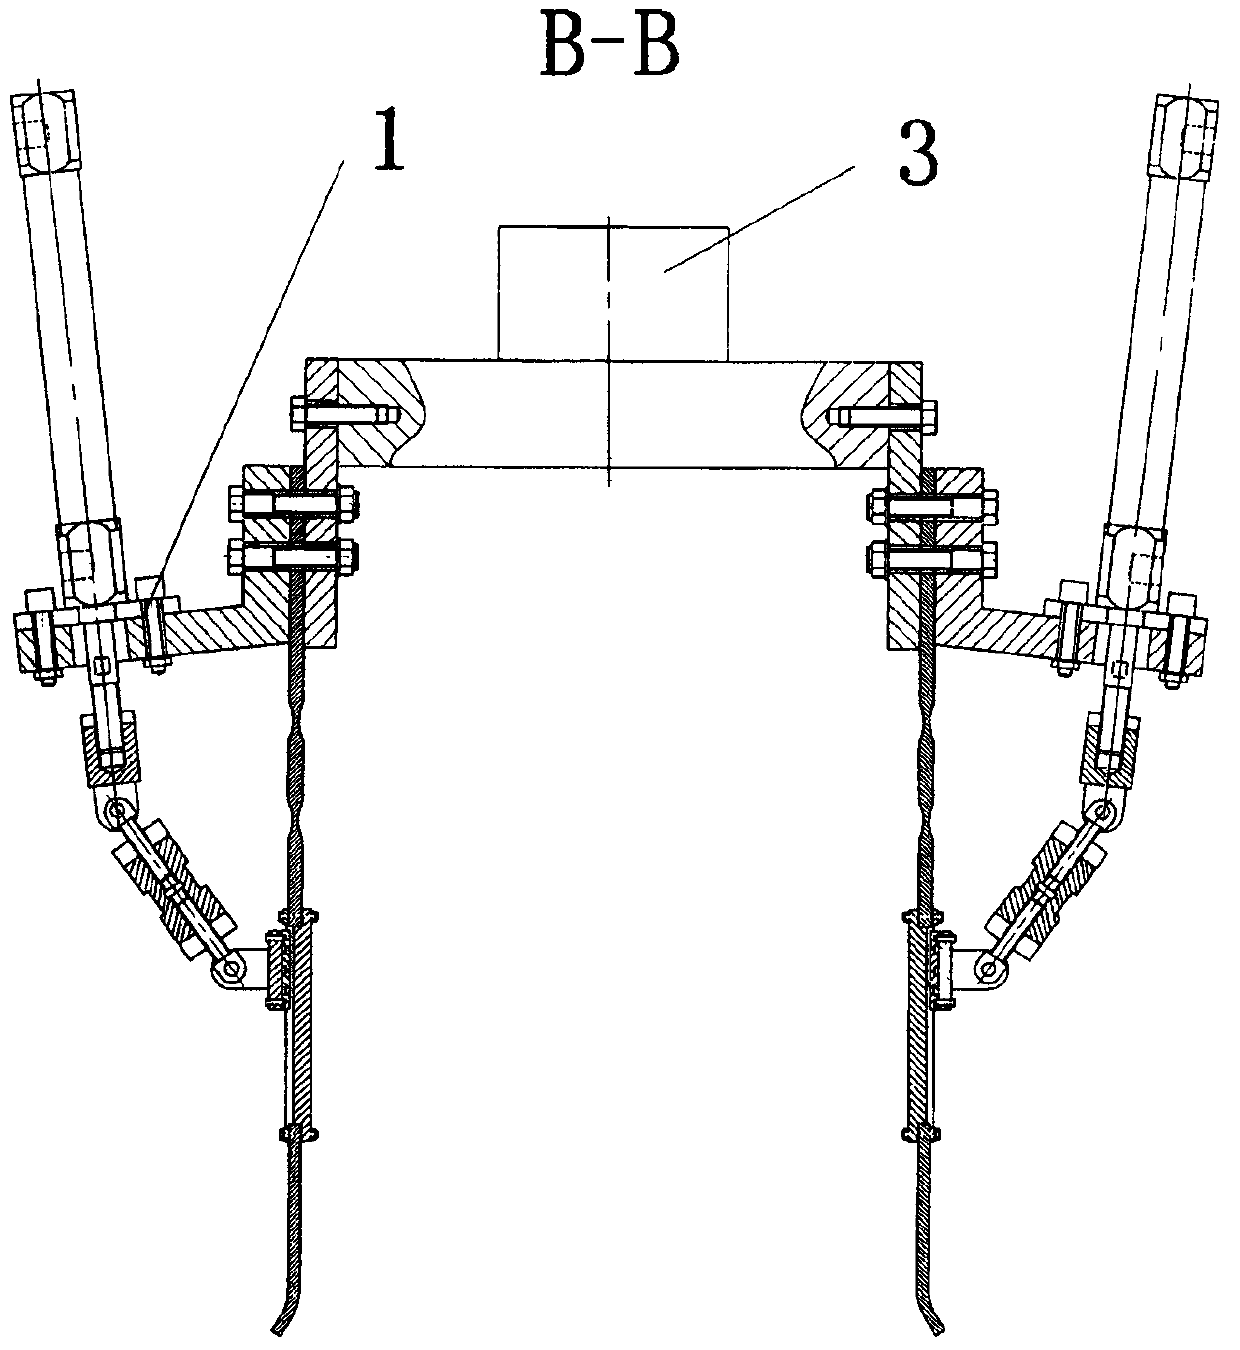 Self-locking boosting type flexible and smooth tail end gripper for serial connection flexible hinge